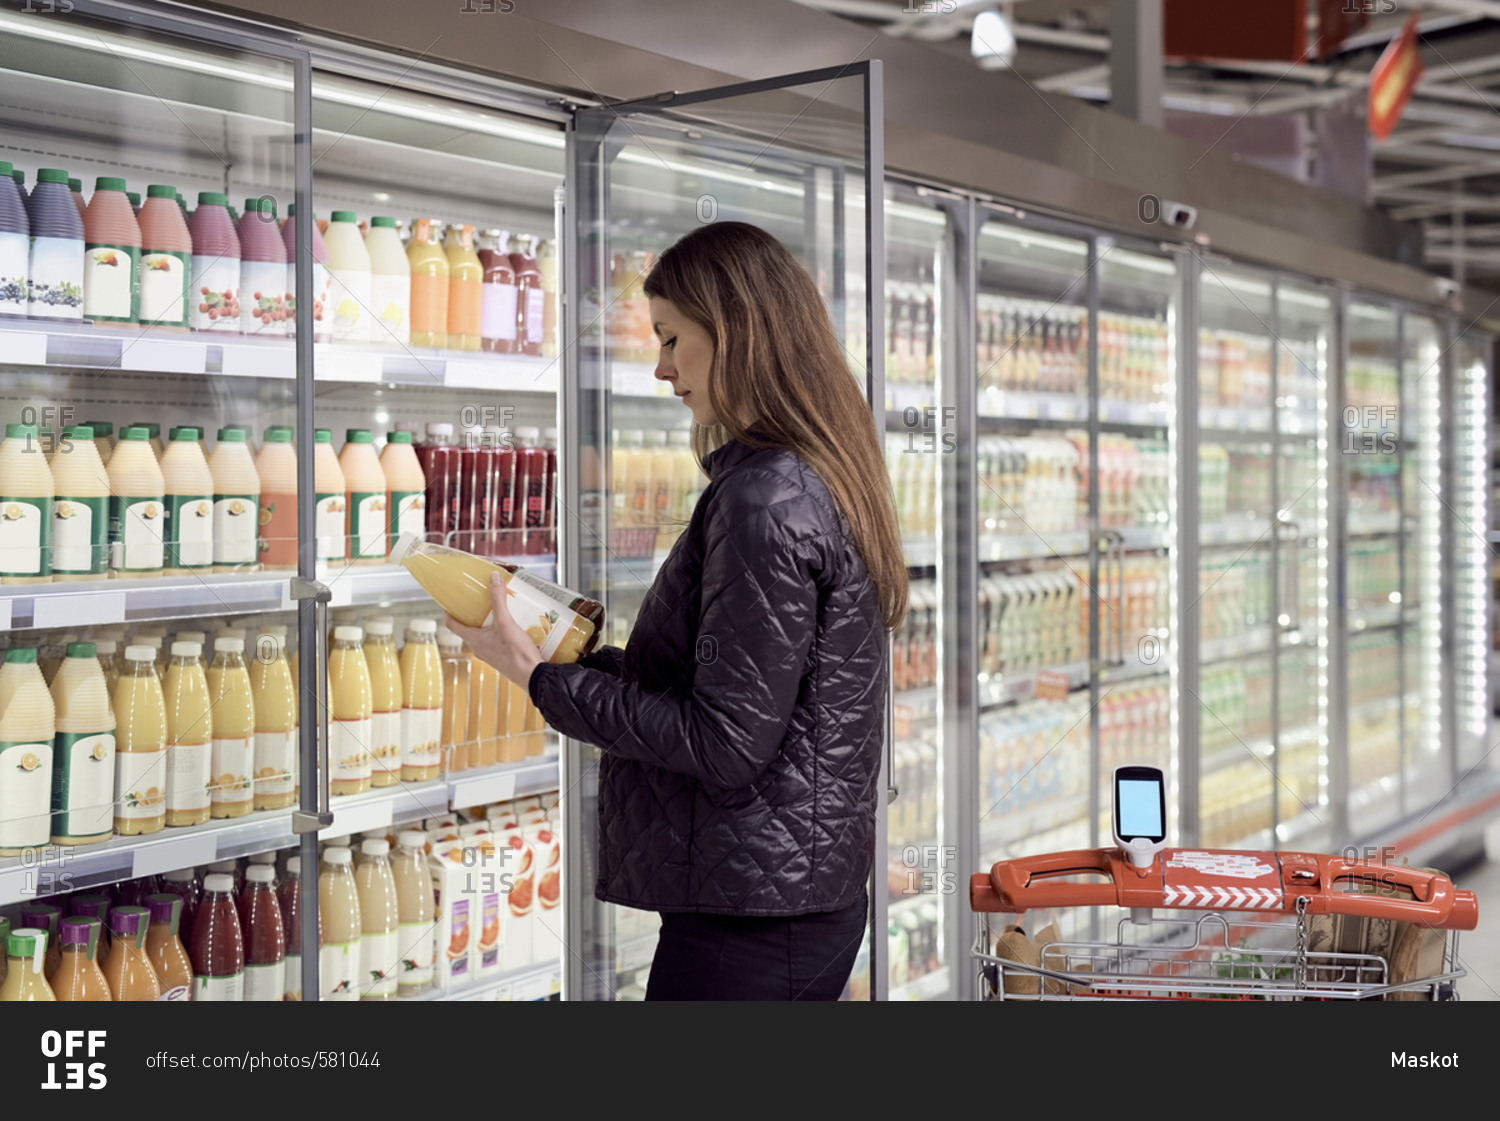 Side view of woman holding juice bottles at refrigerated section in supermarket